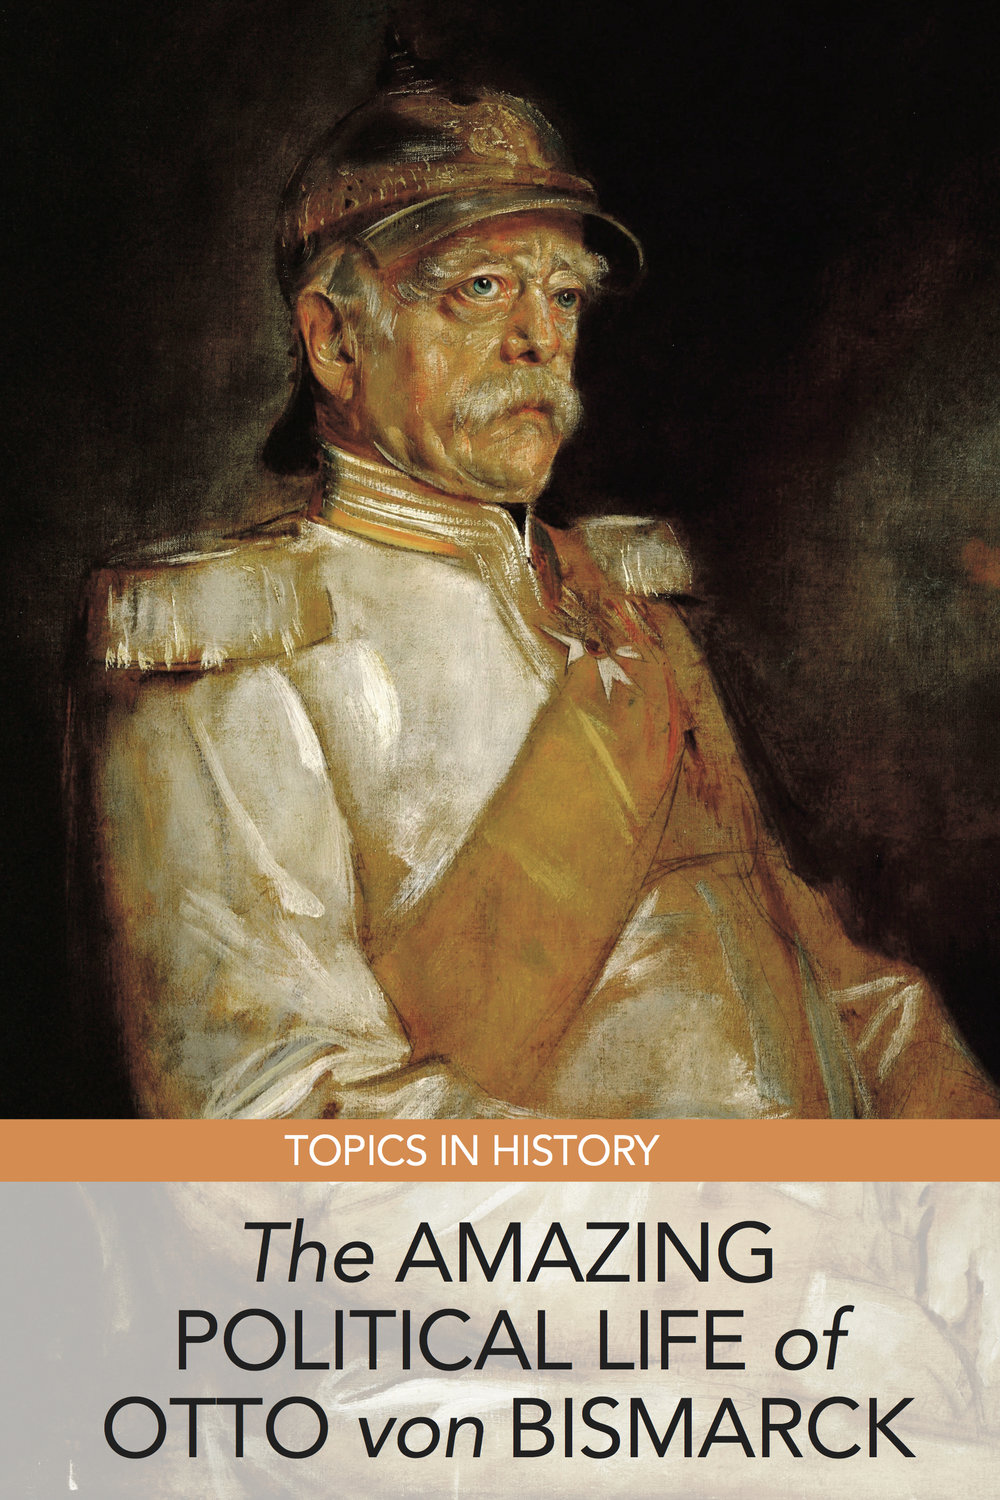 Topics in History: The Amazing Political Life of Otto von Bismarck